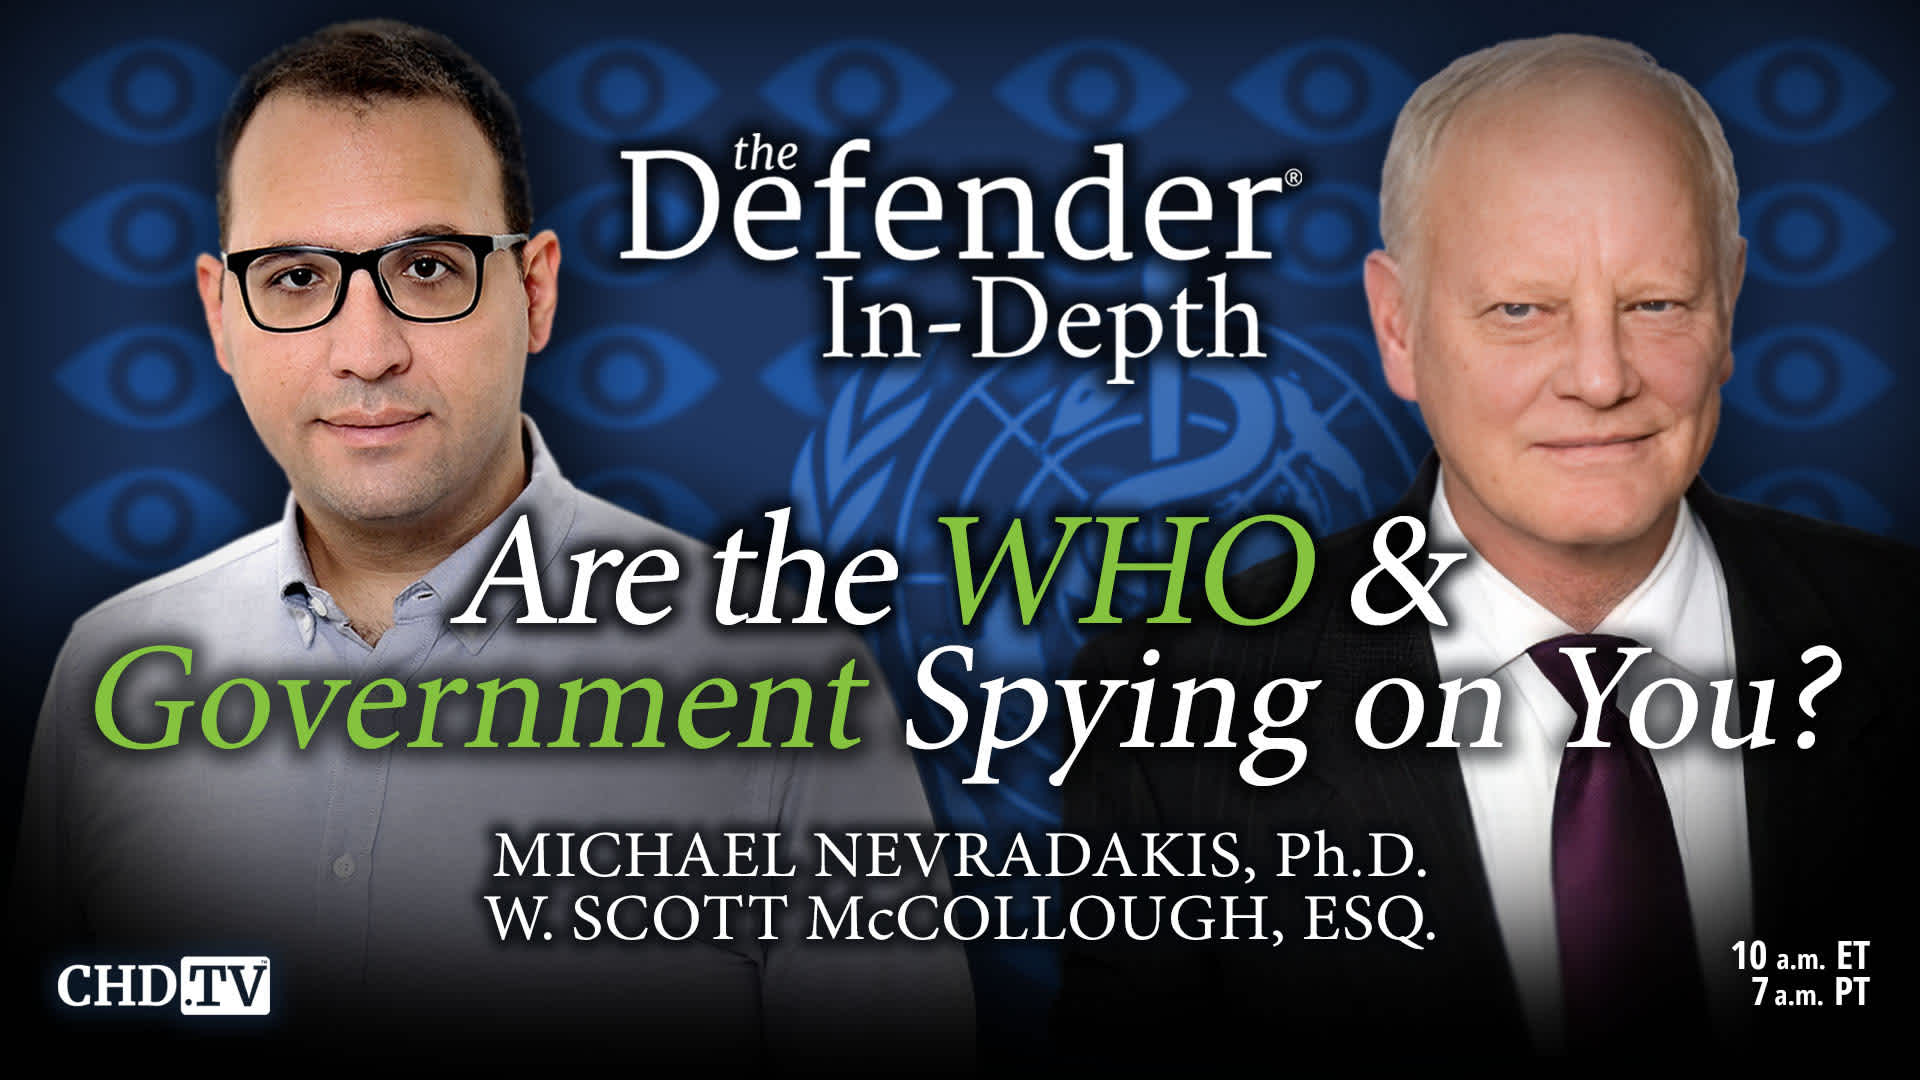 Are the WHO & Government Spying on You?